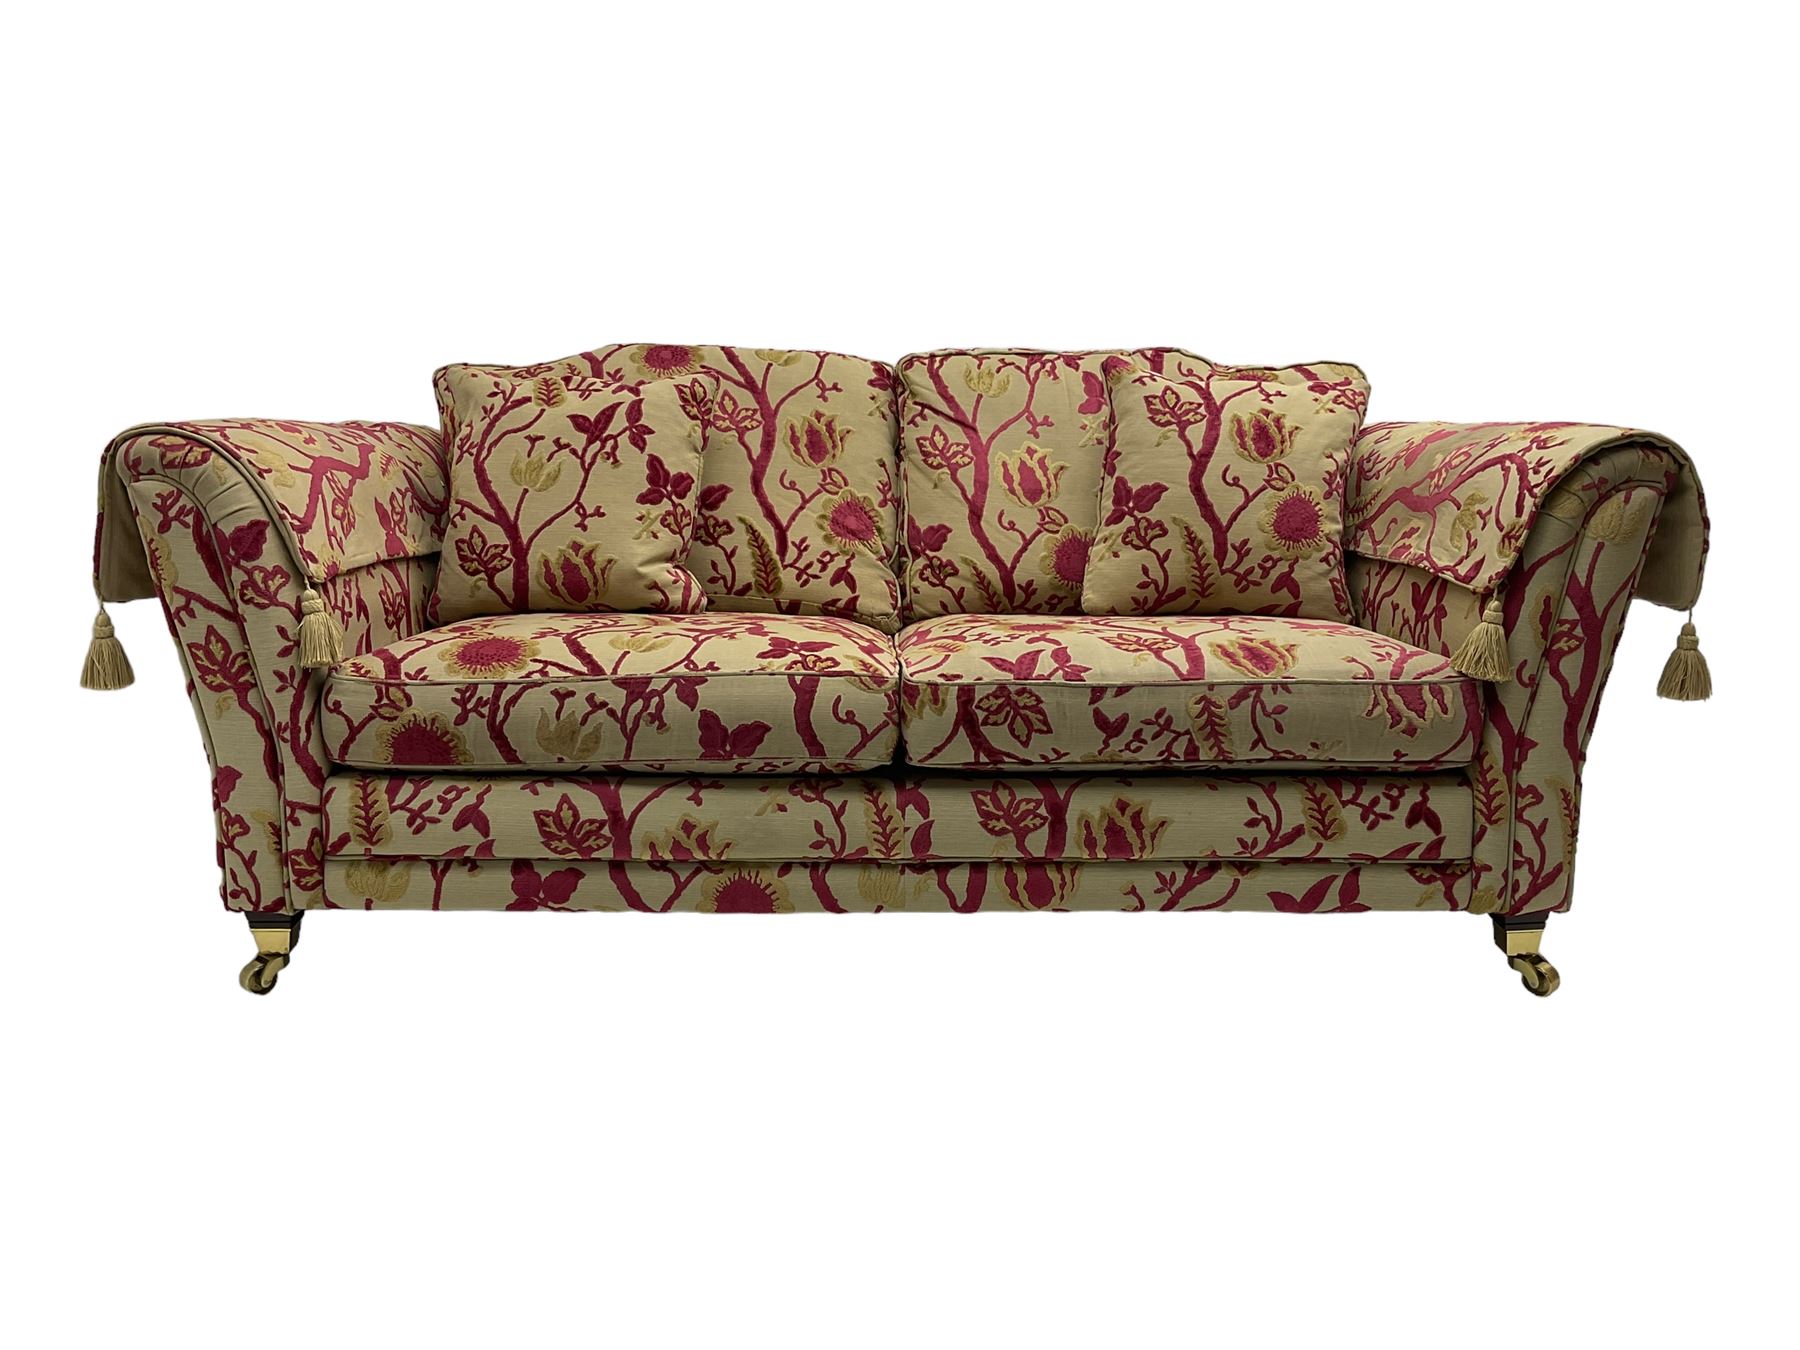 Three-piece lounge suite - large two-seat sofa upholstered in red and gold striped fabric (W185cm - Bild 2 aus 24